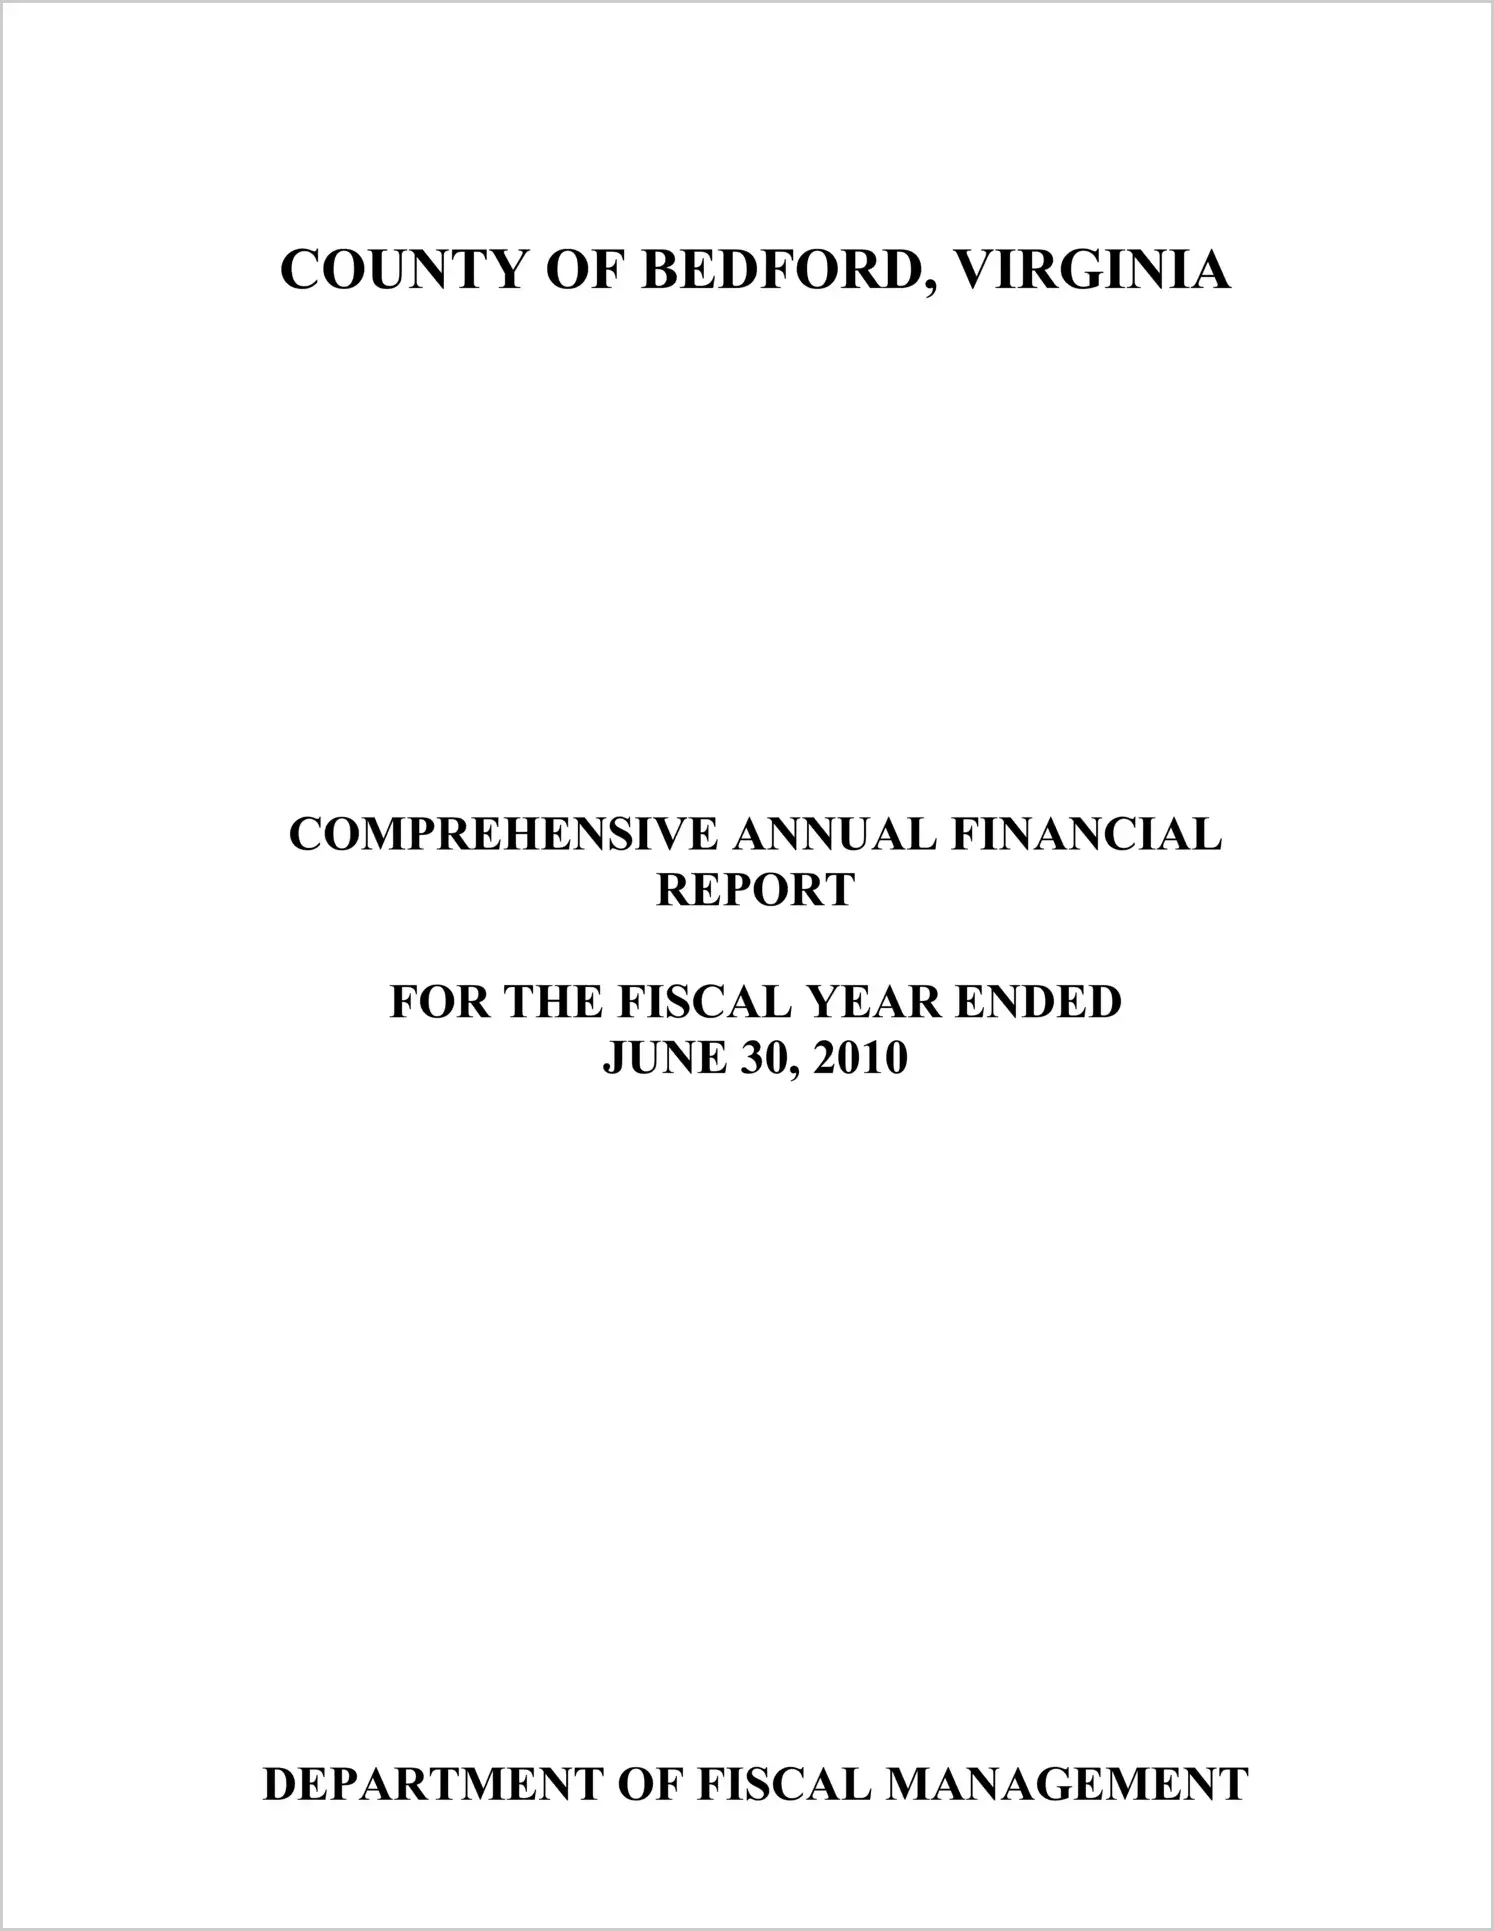 2010 Annual Financial Report for County of Bedford